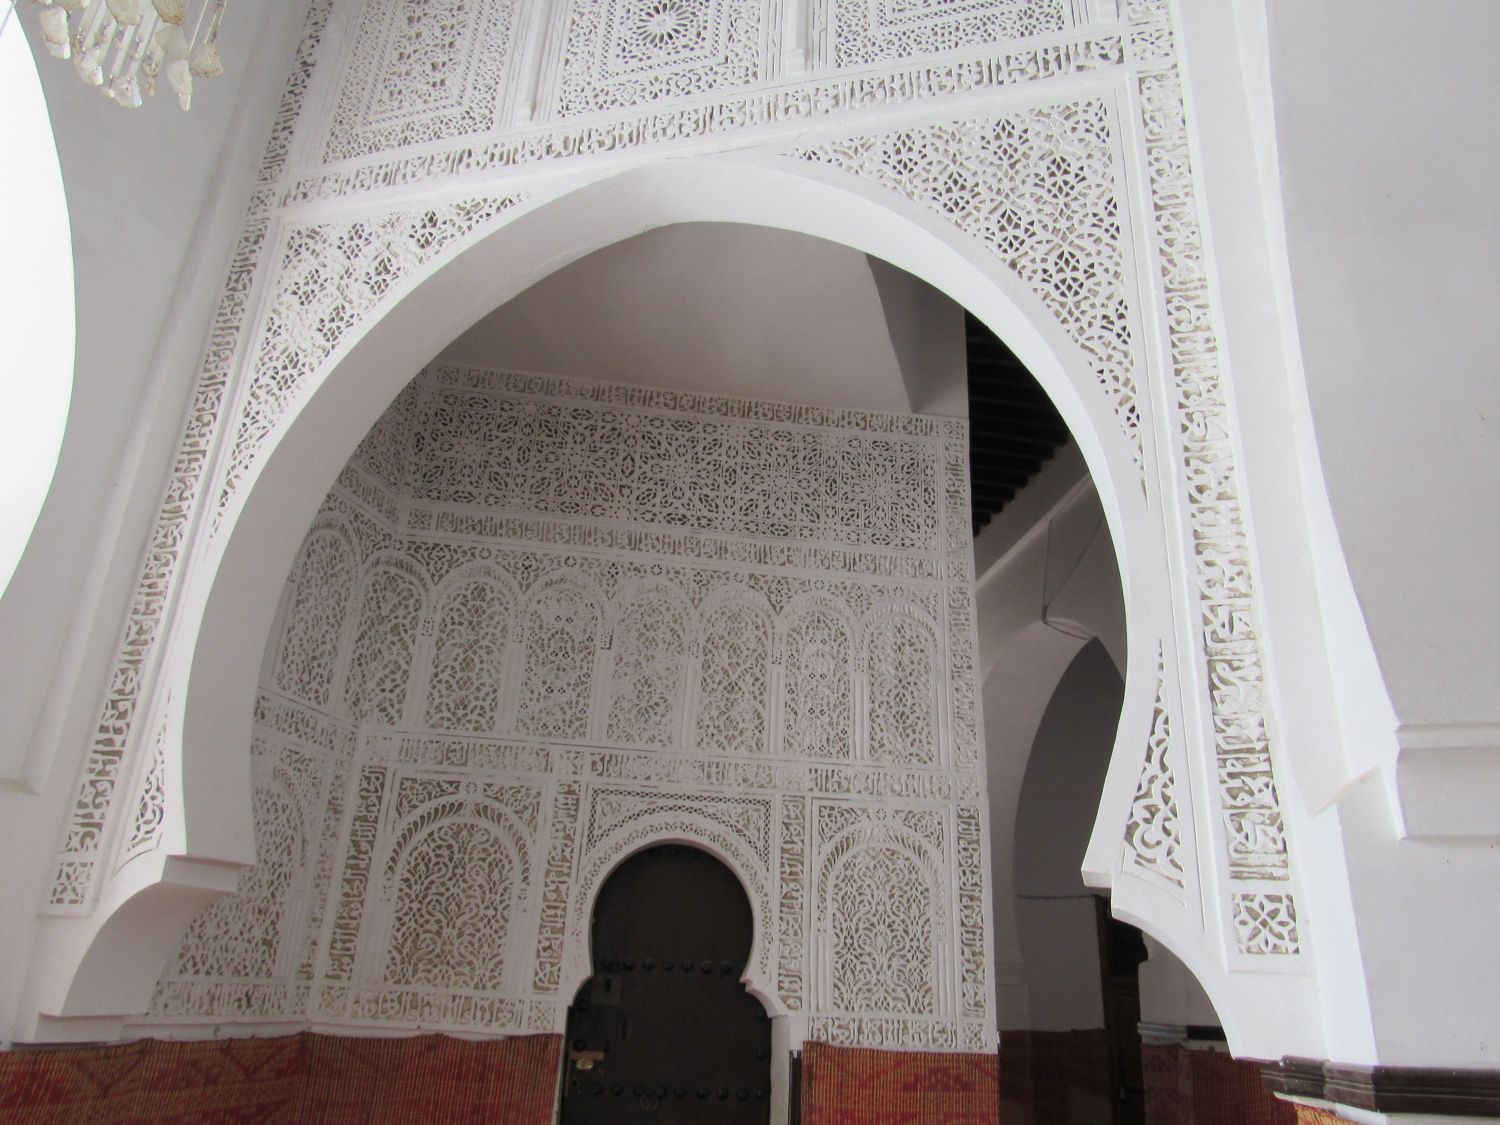 Interior view, hallway decorated with carved stucco, geometric patterns.